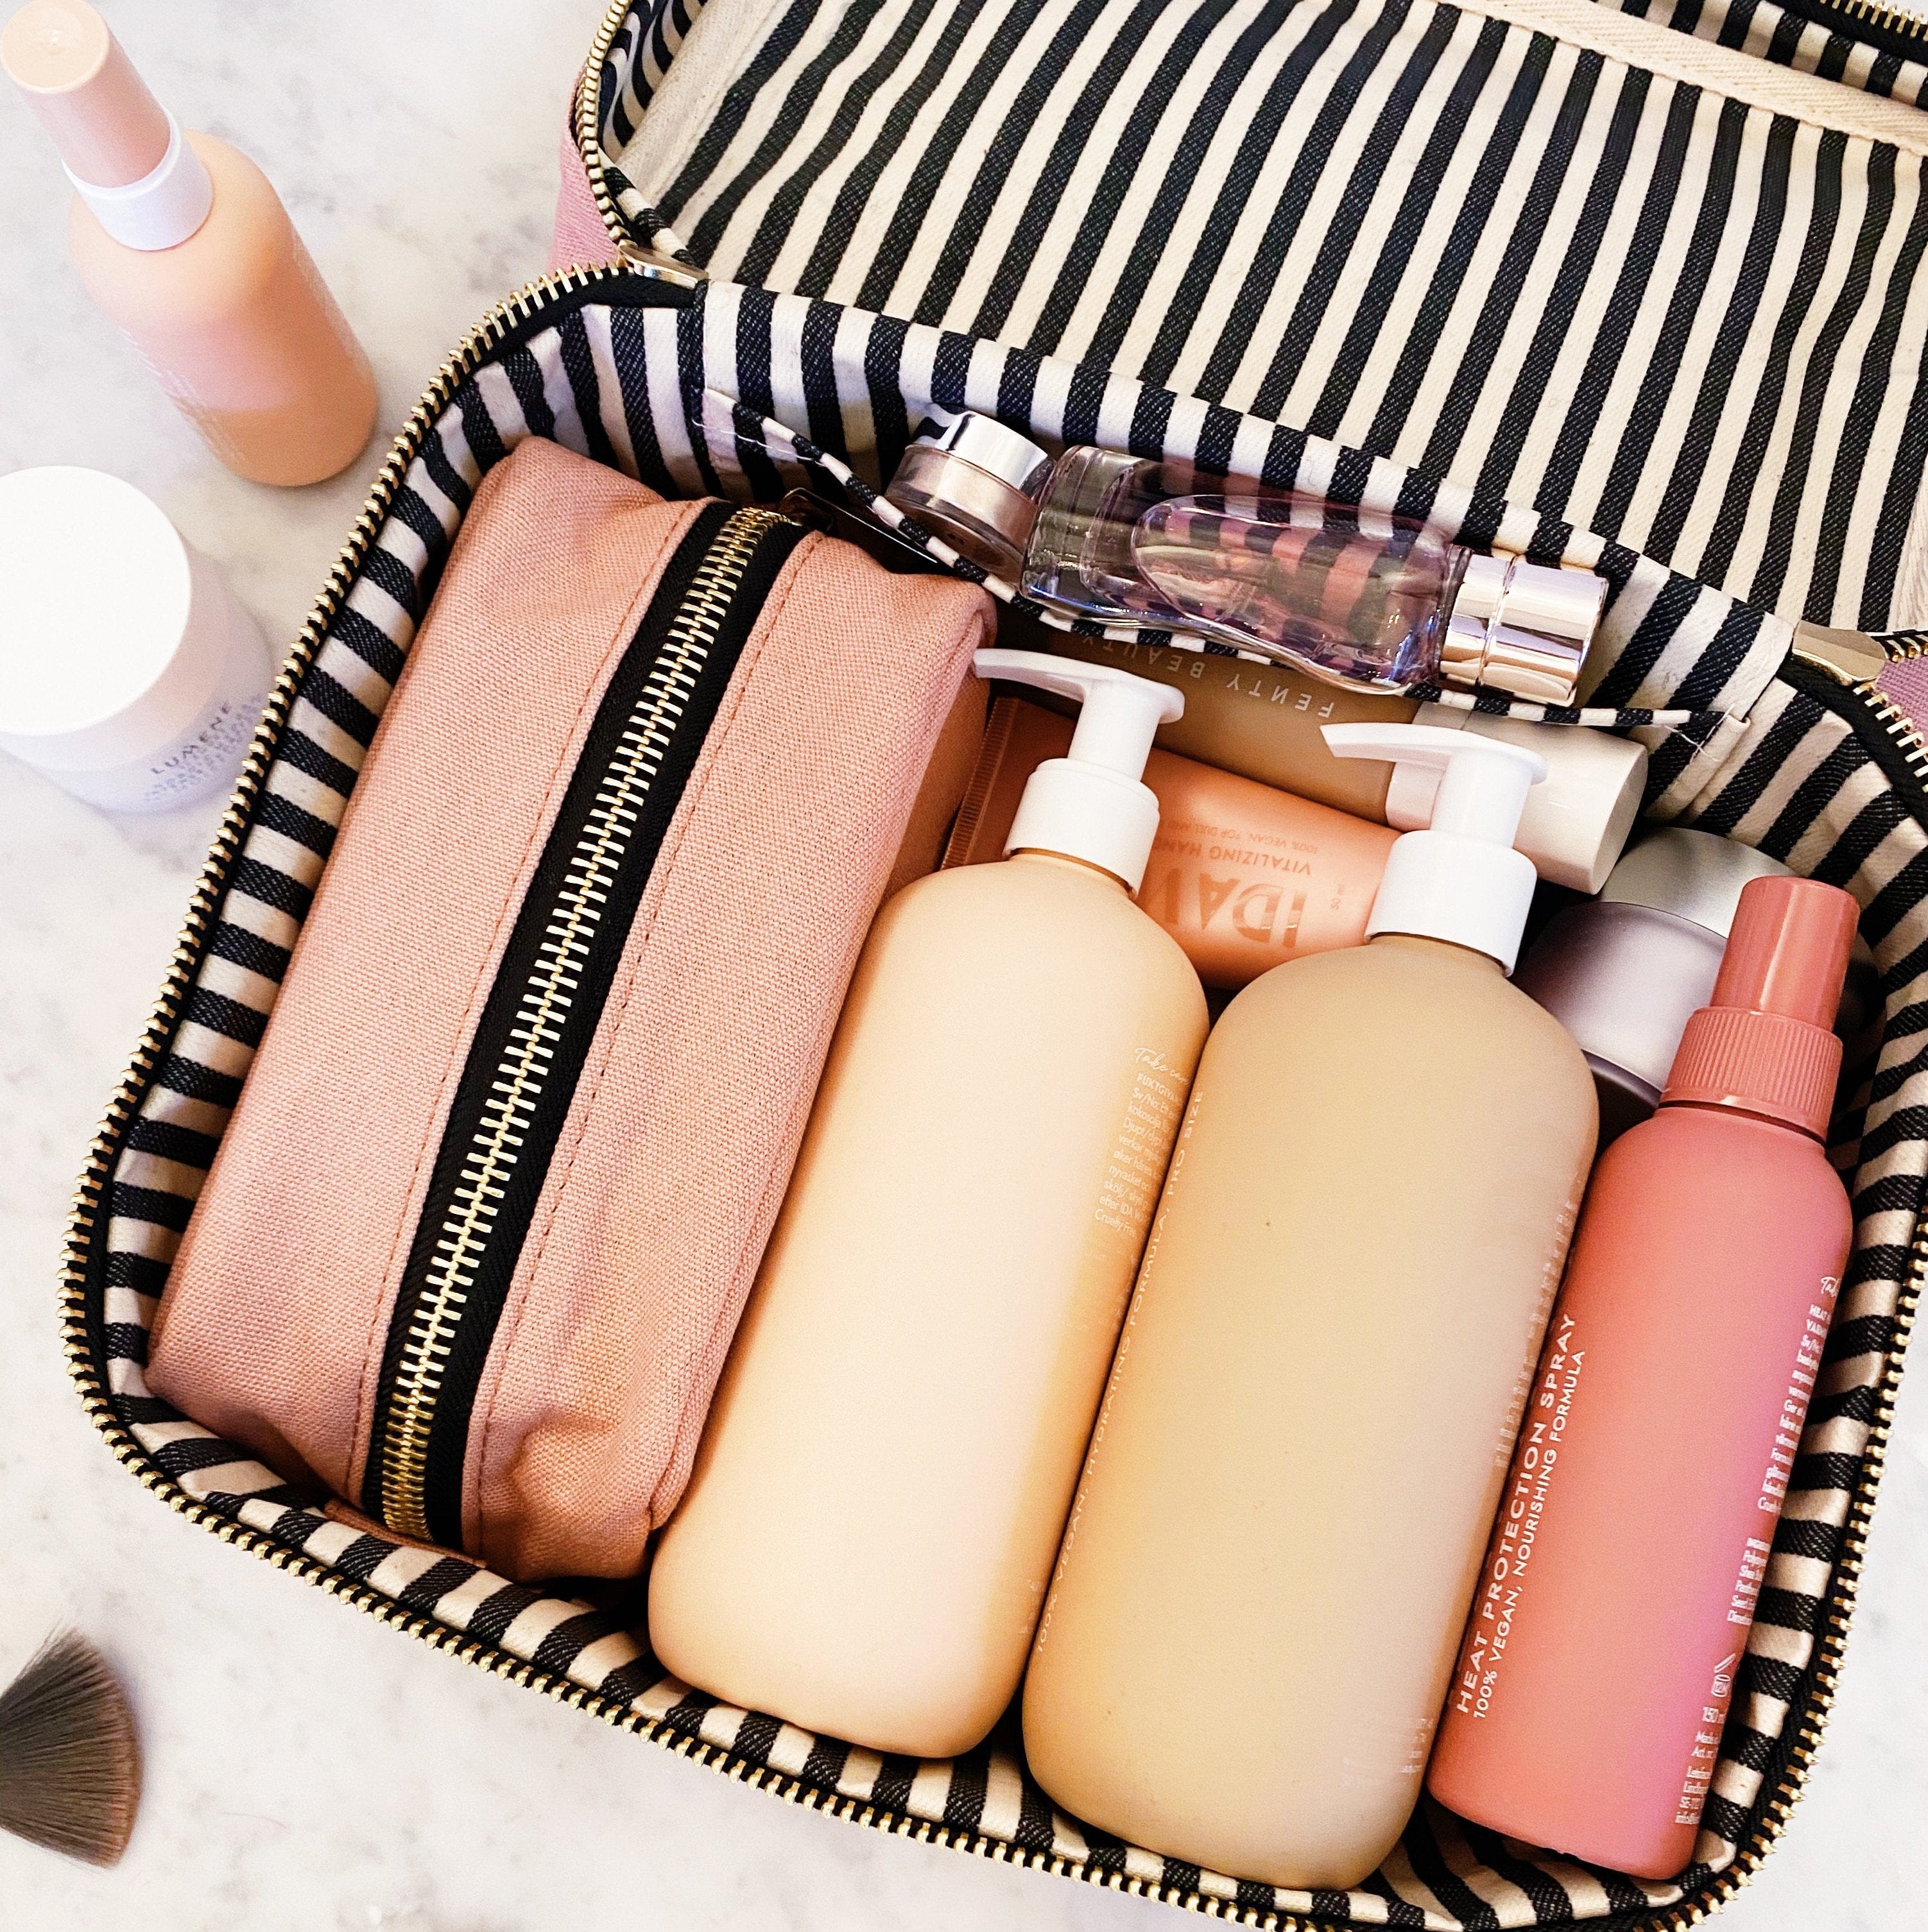 Beauty essentials inside the vanity/beauty case. 